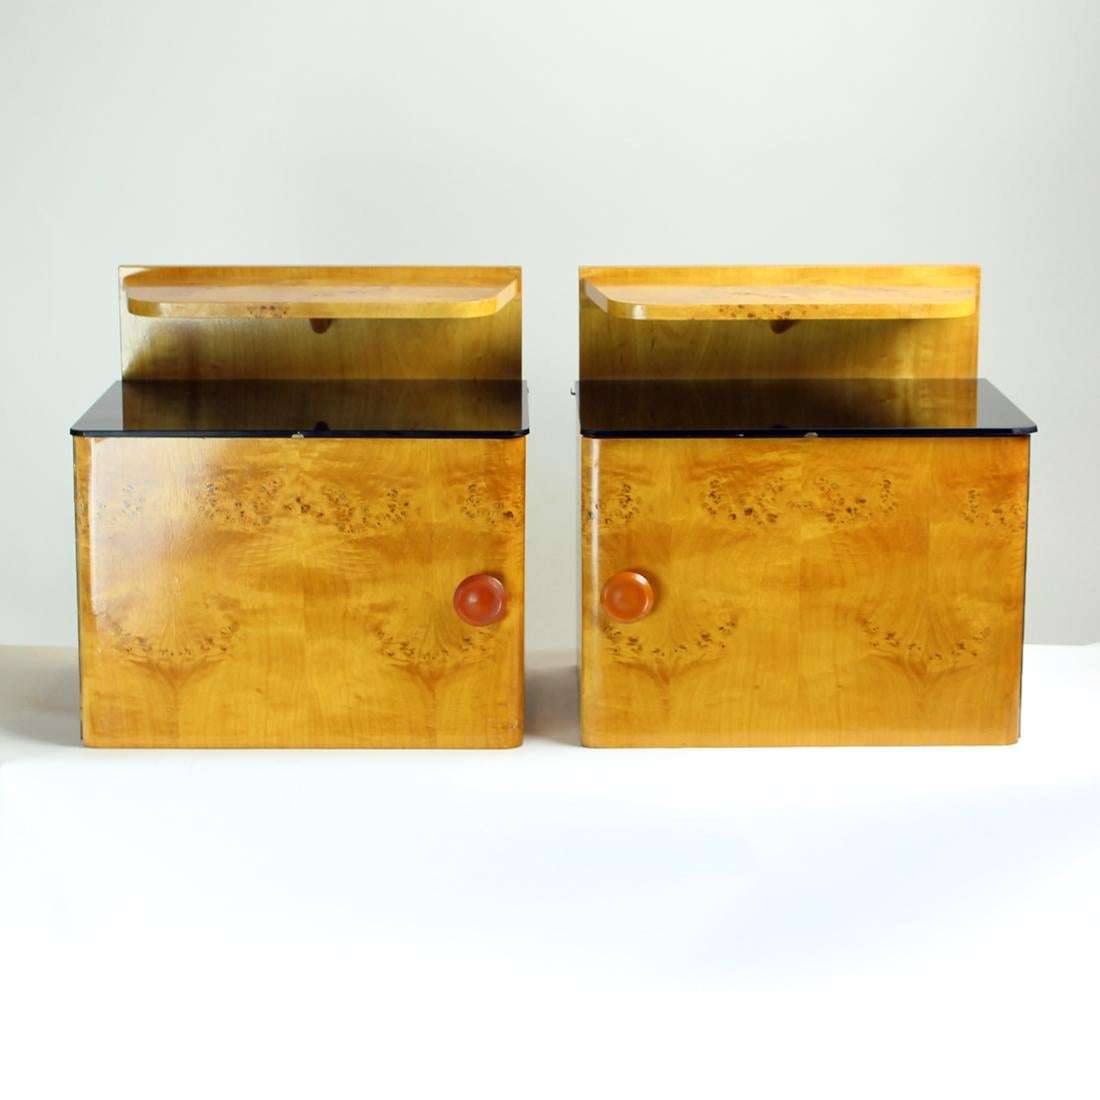 Beautiful set of two bedside tables. Produced in Czechoslovakia in 1940s, the art deco period. The tables are made of strong oak wood with veneer on top. Each table has a compartment with mirror-opening doors on piano hindges. Inside there is one